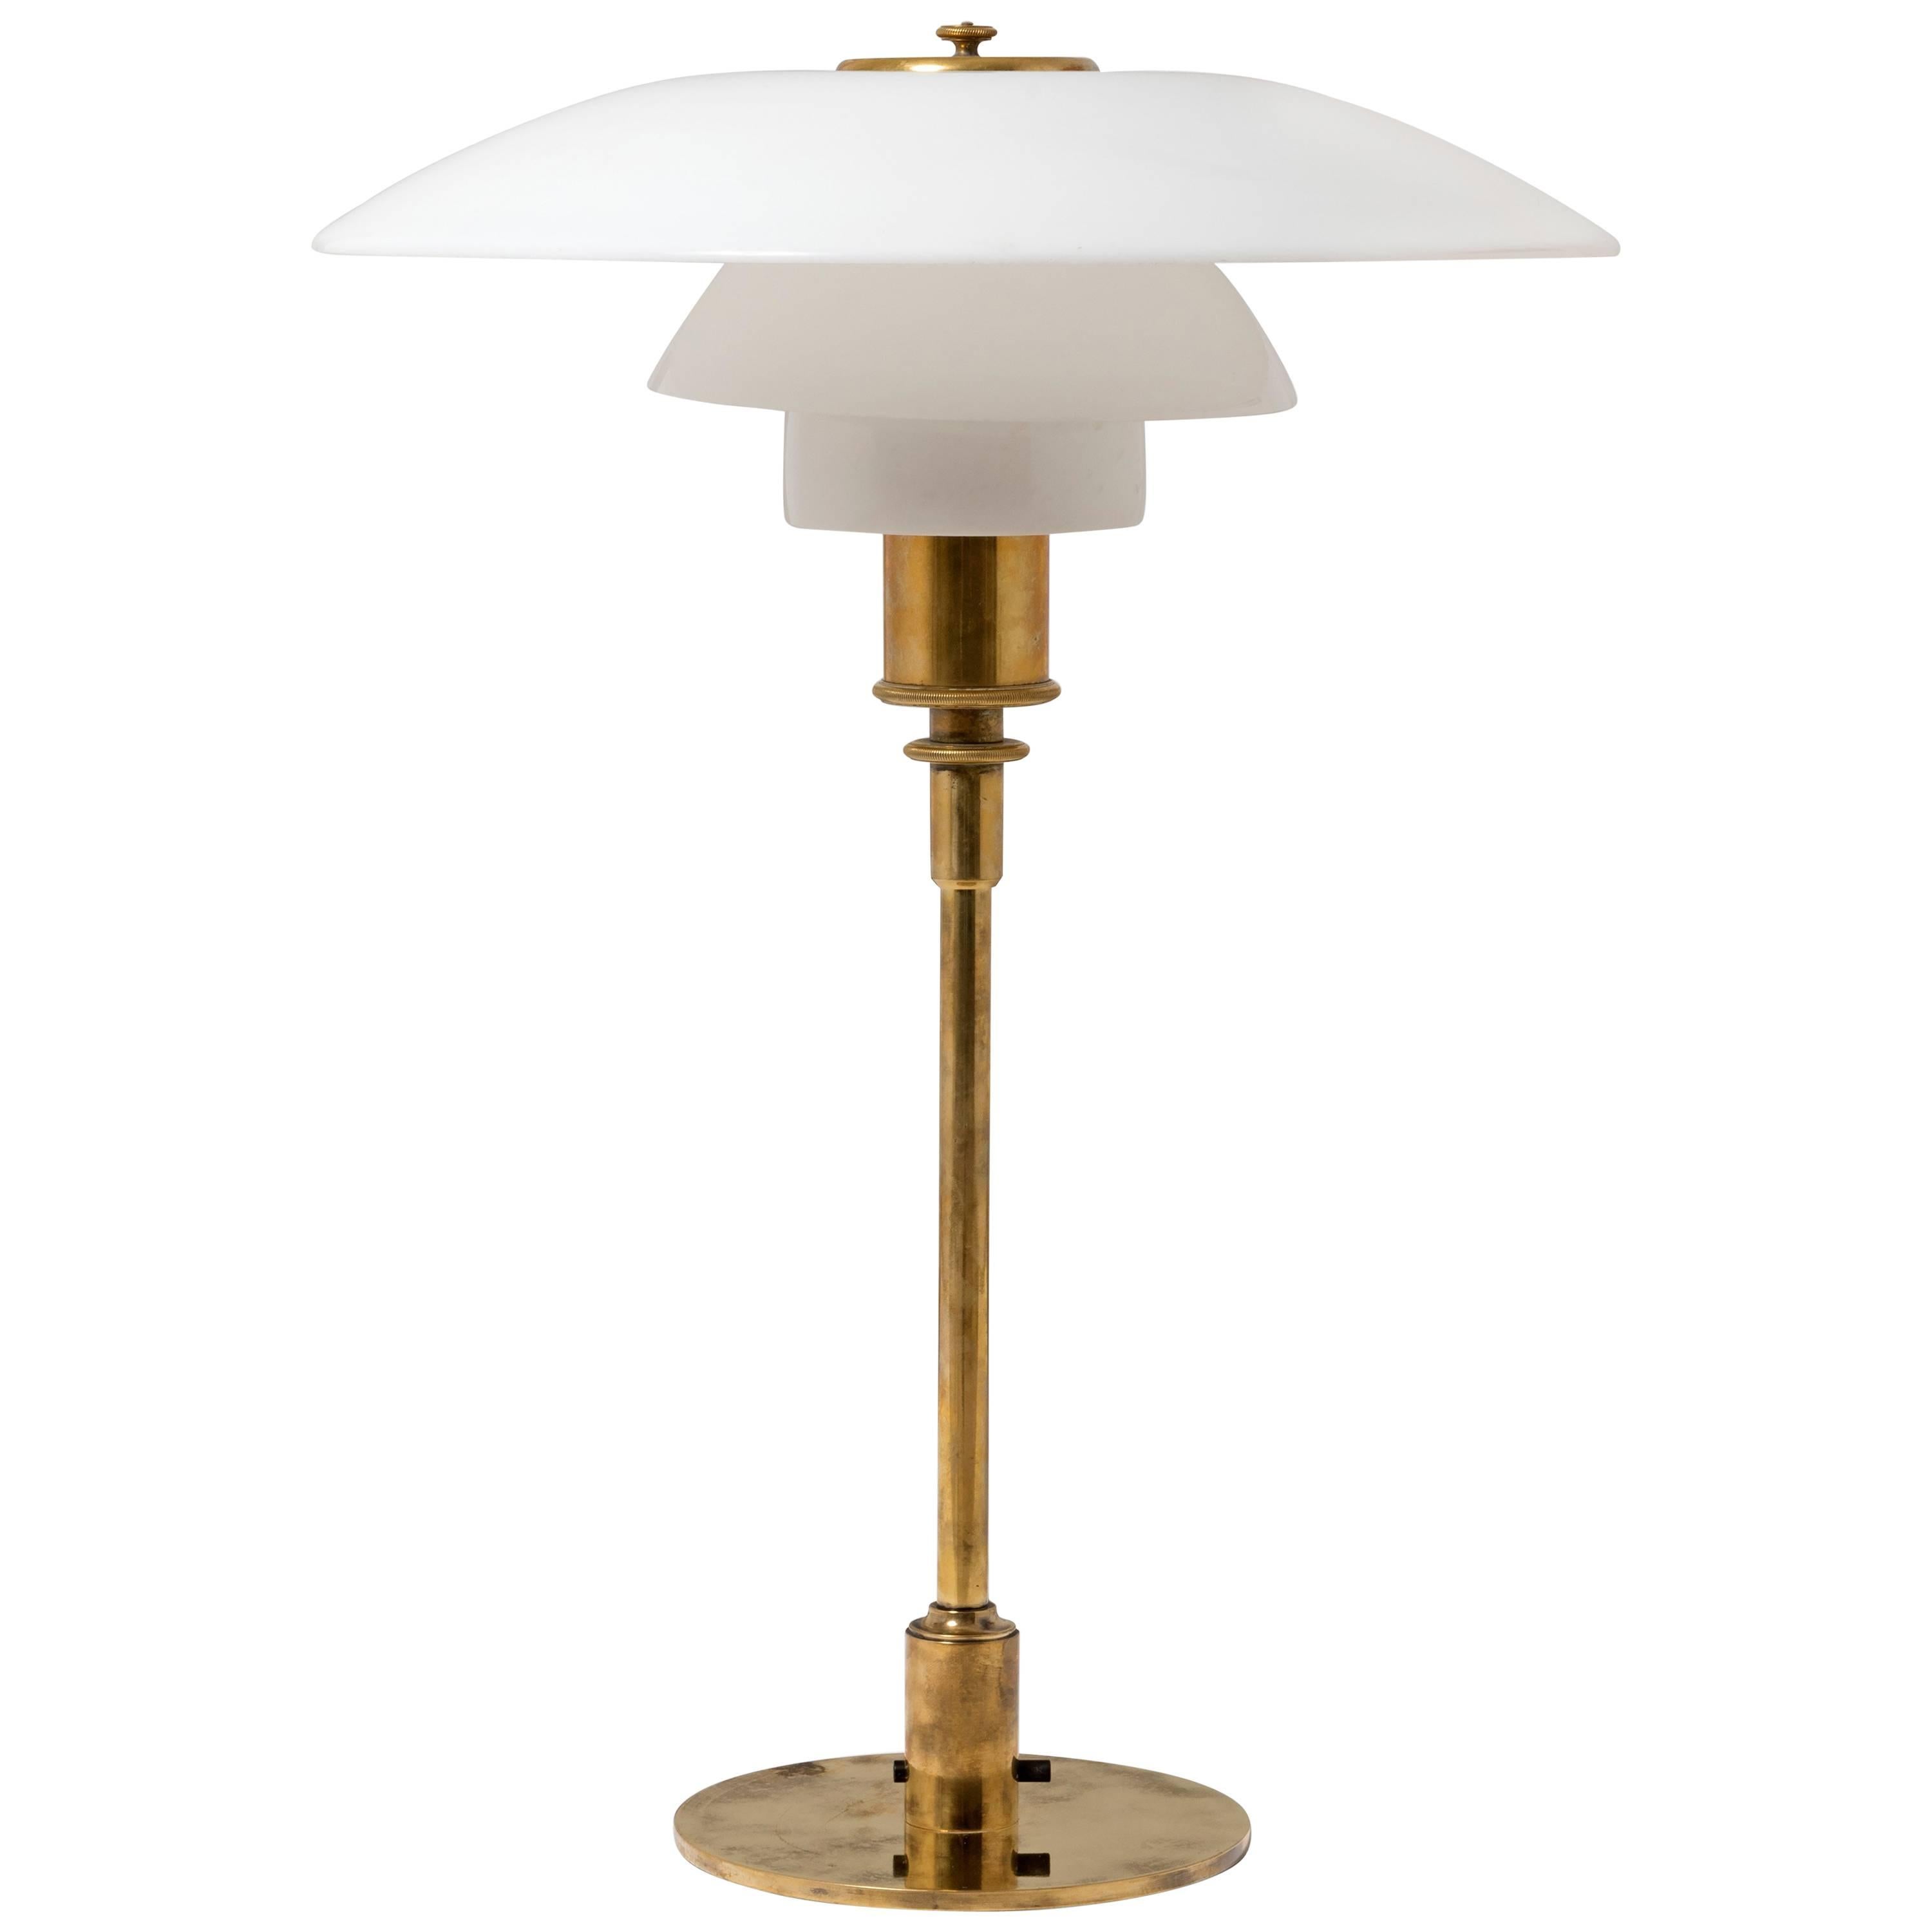 PH 4 Lamp by Poul Henningsen For Sale